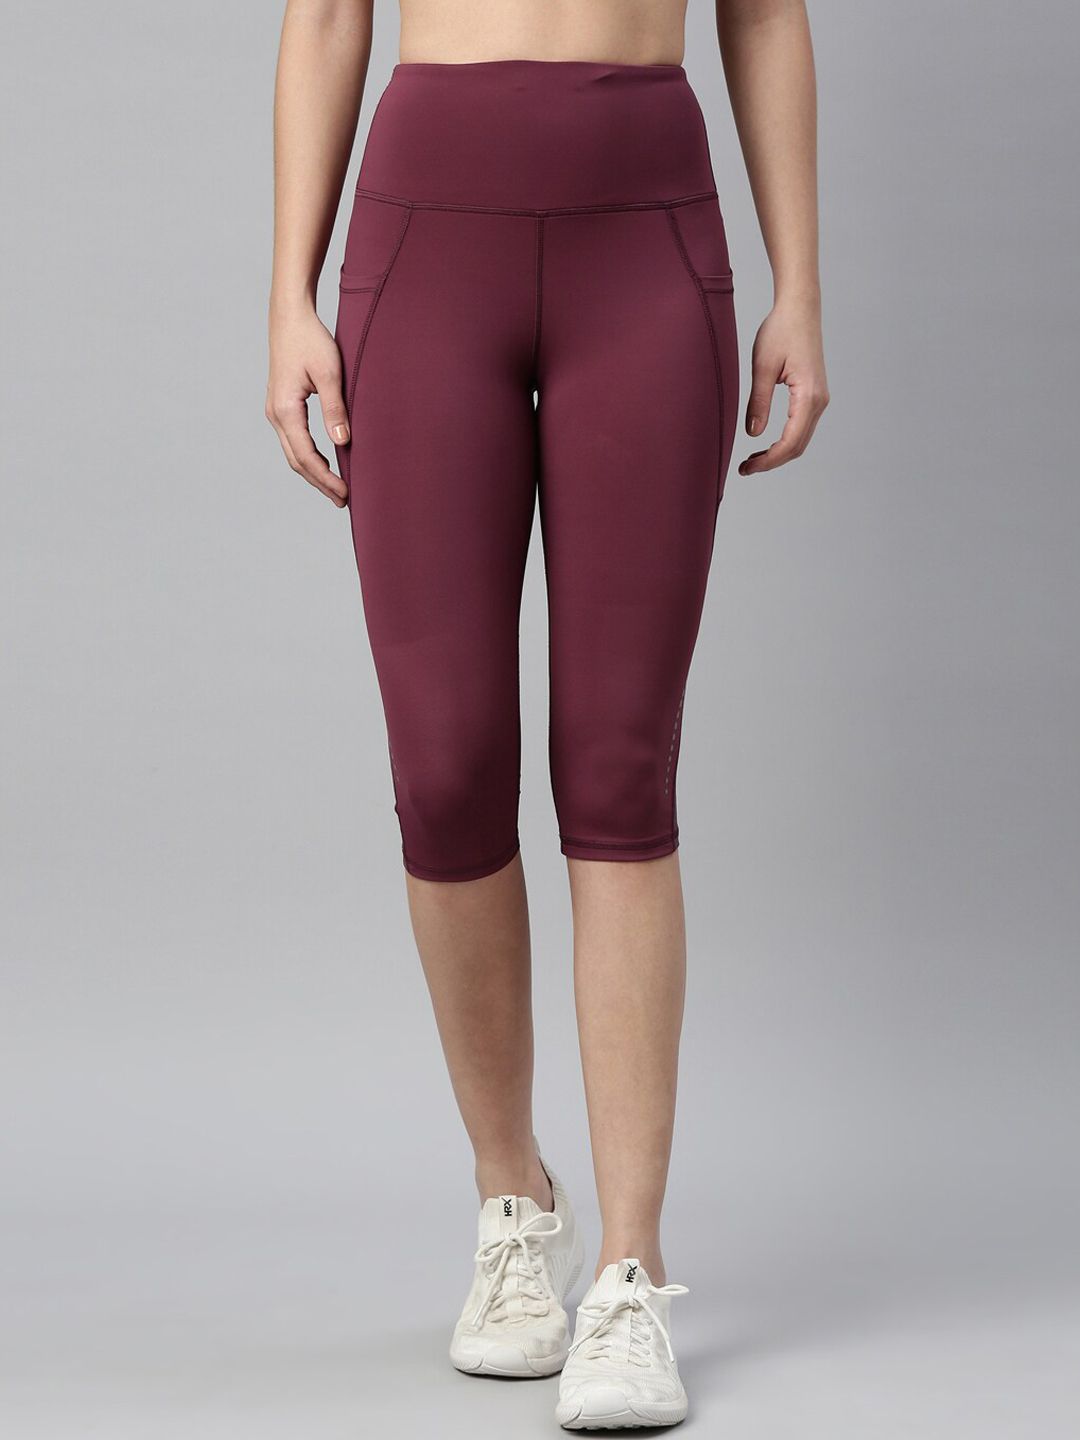 Enamor Women Maroon Solid Antimicrobial Dry-Fit Tights Price in India